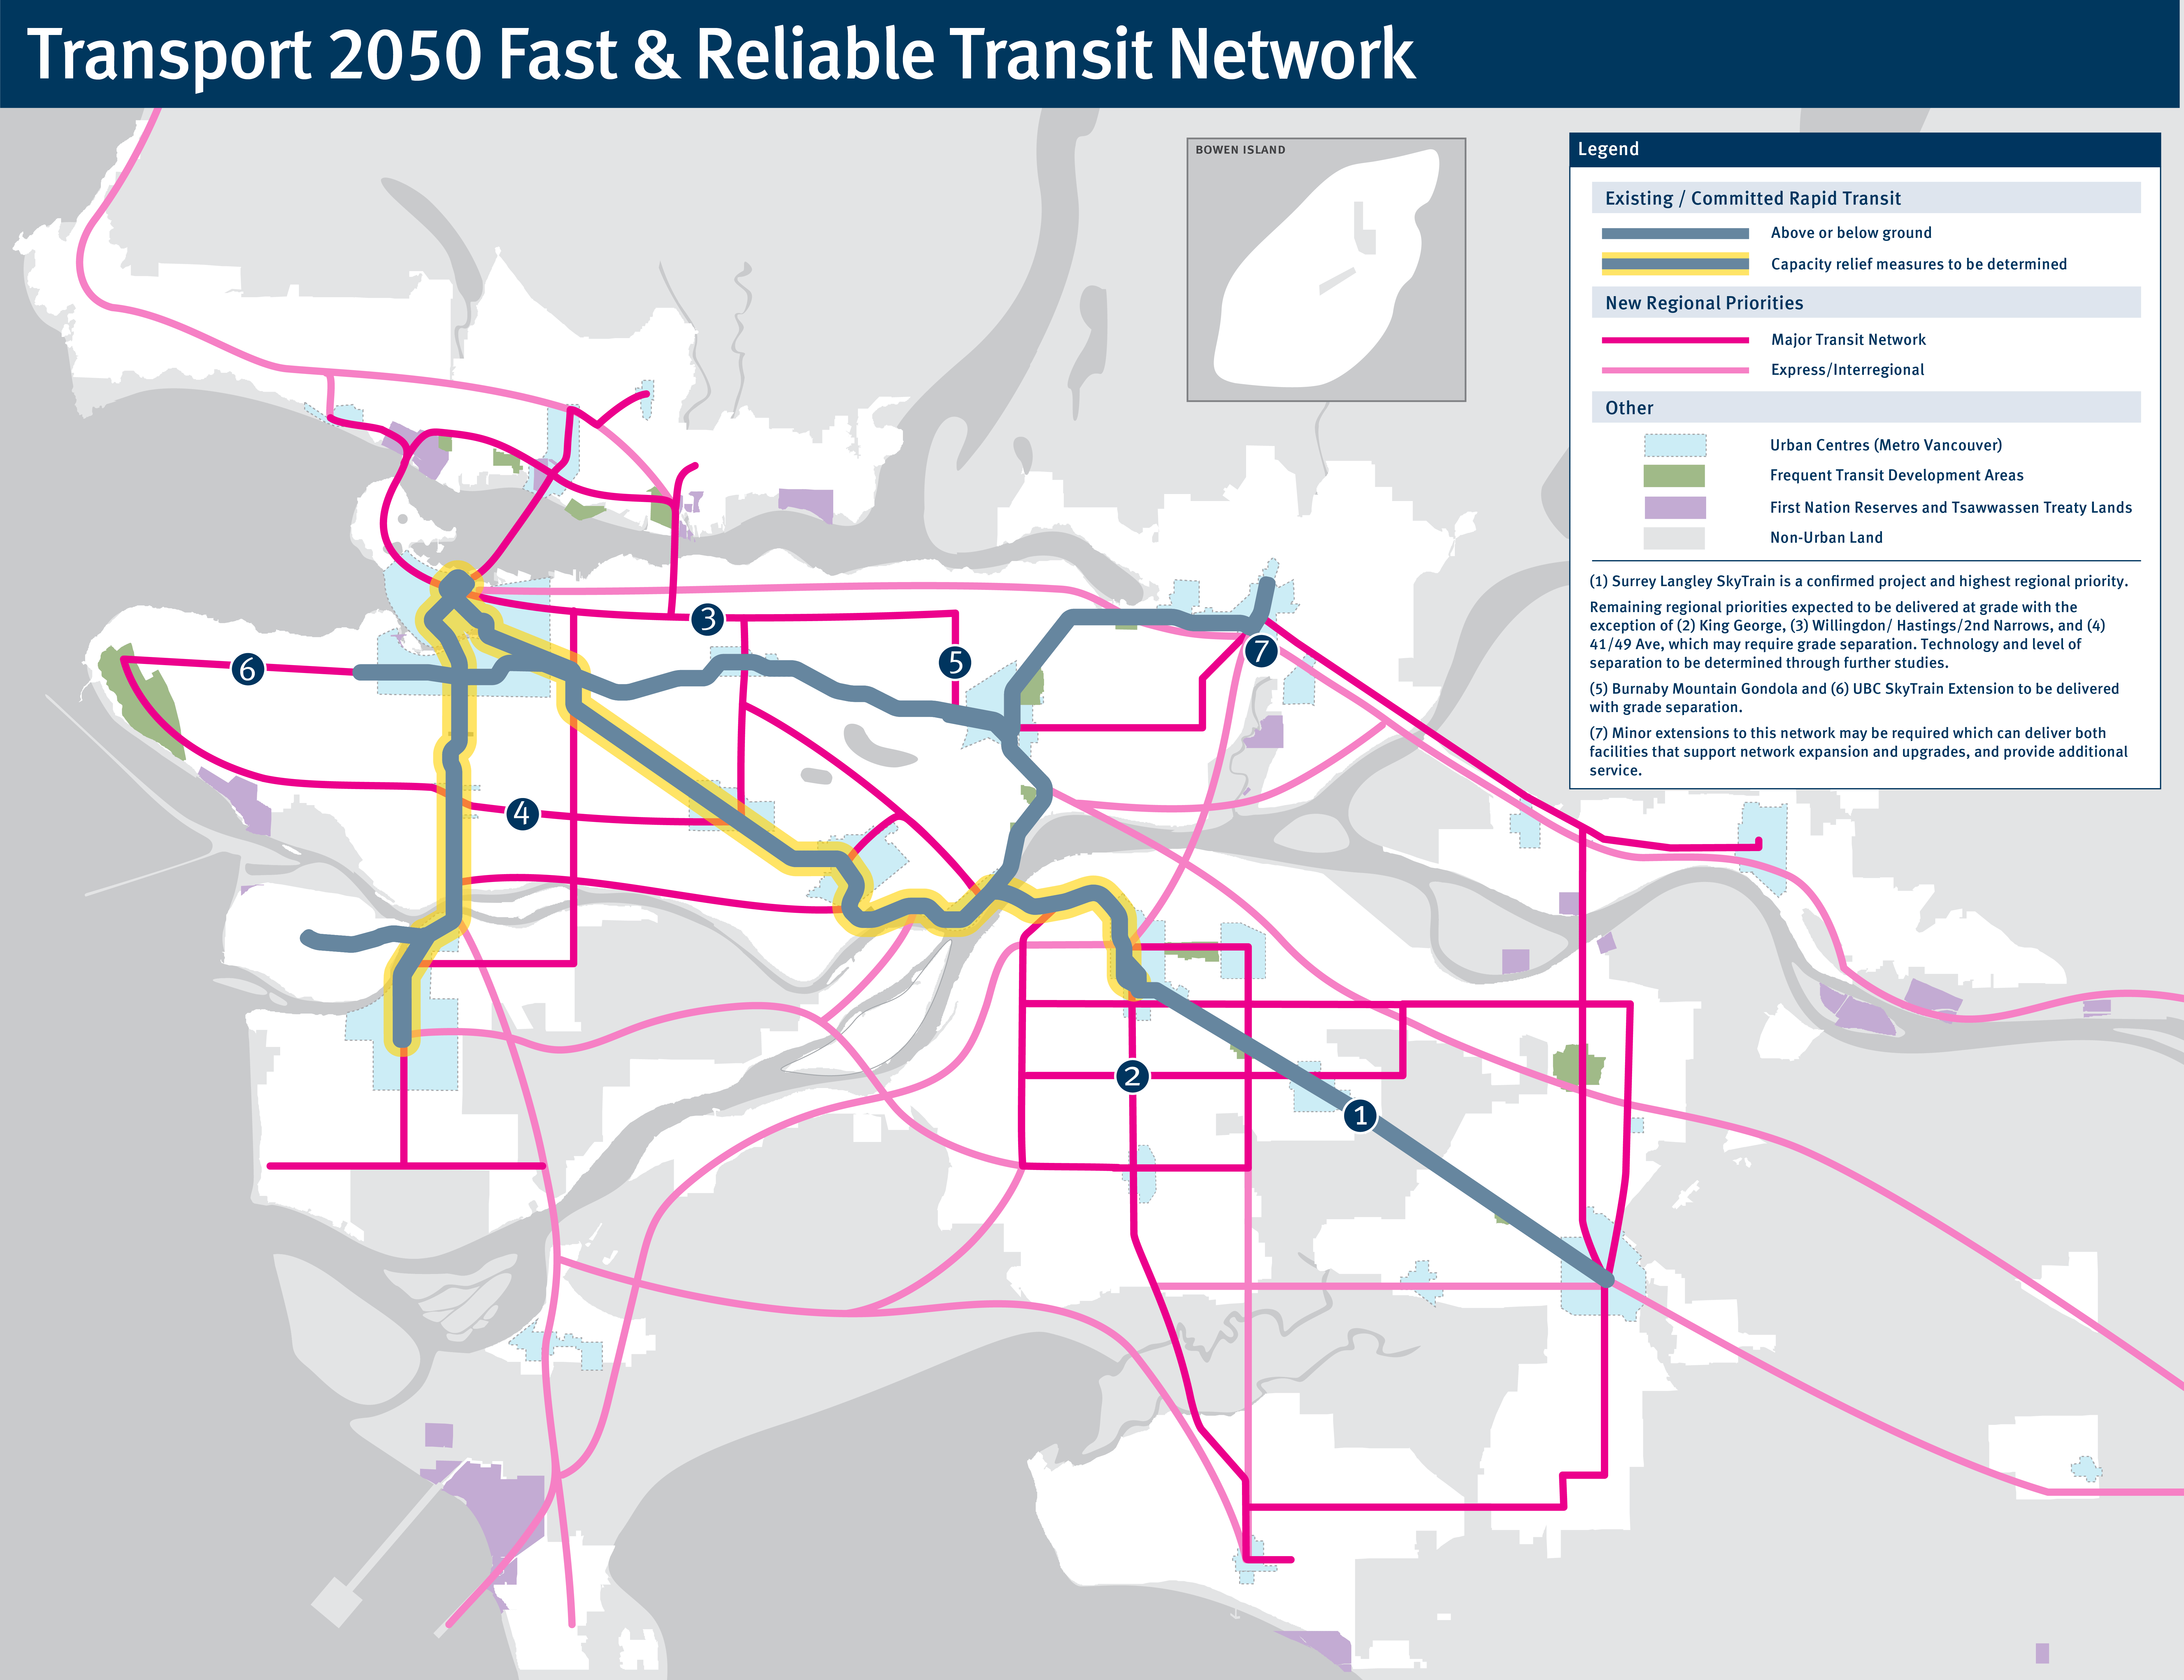 Transport 2050 Fast & Reliable Transit Network map